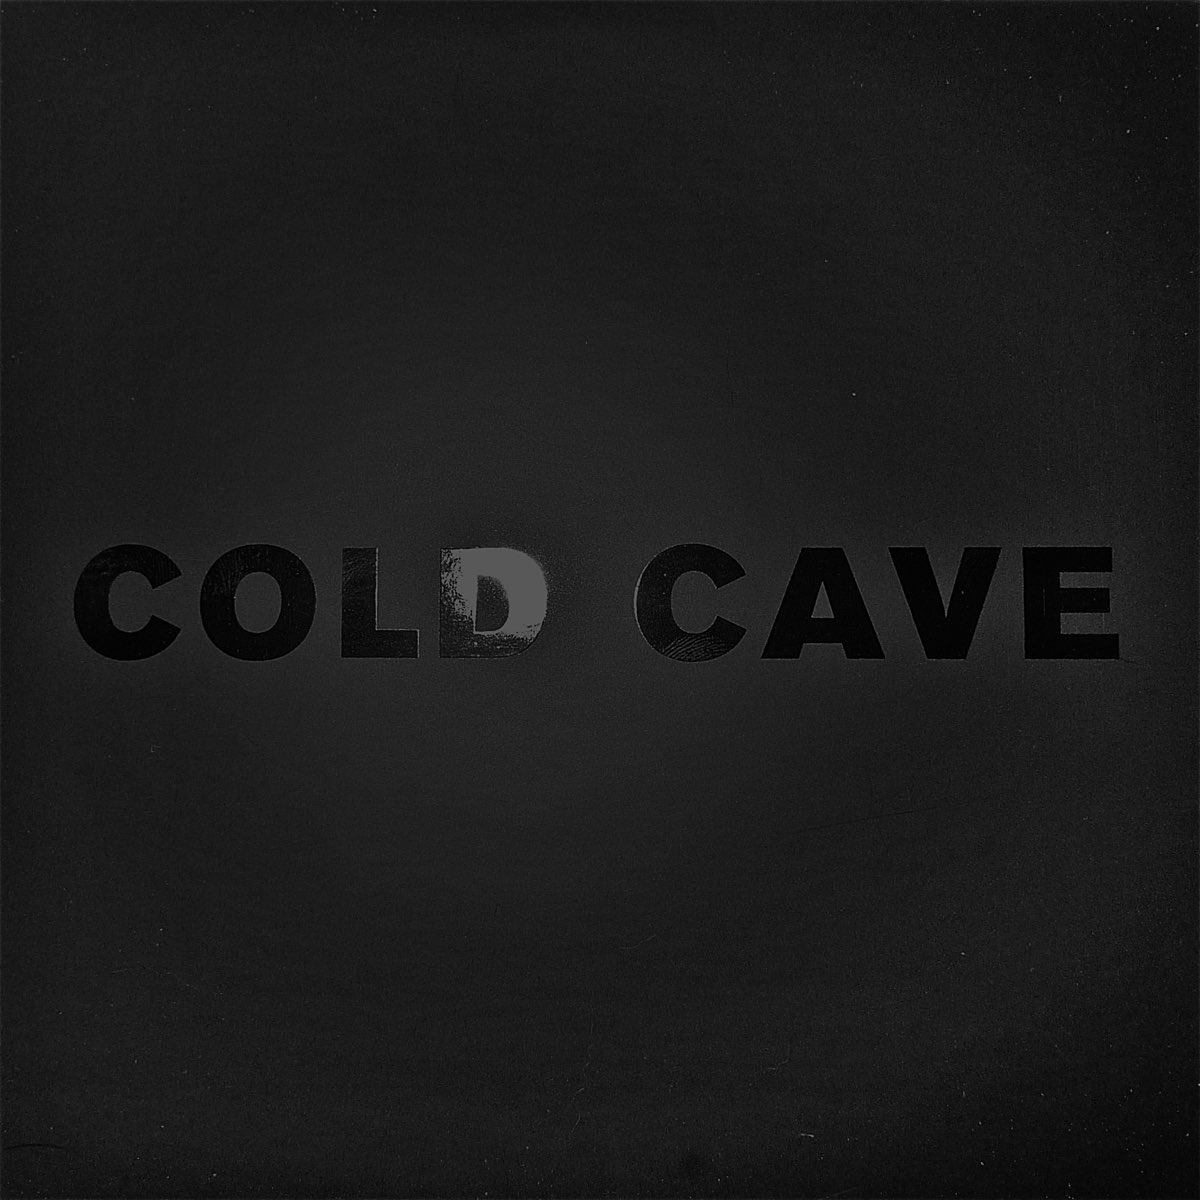 Life is cold. Cold Cave.